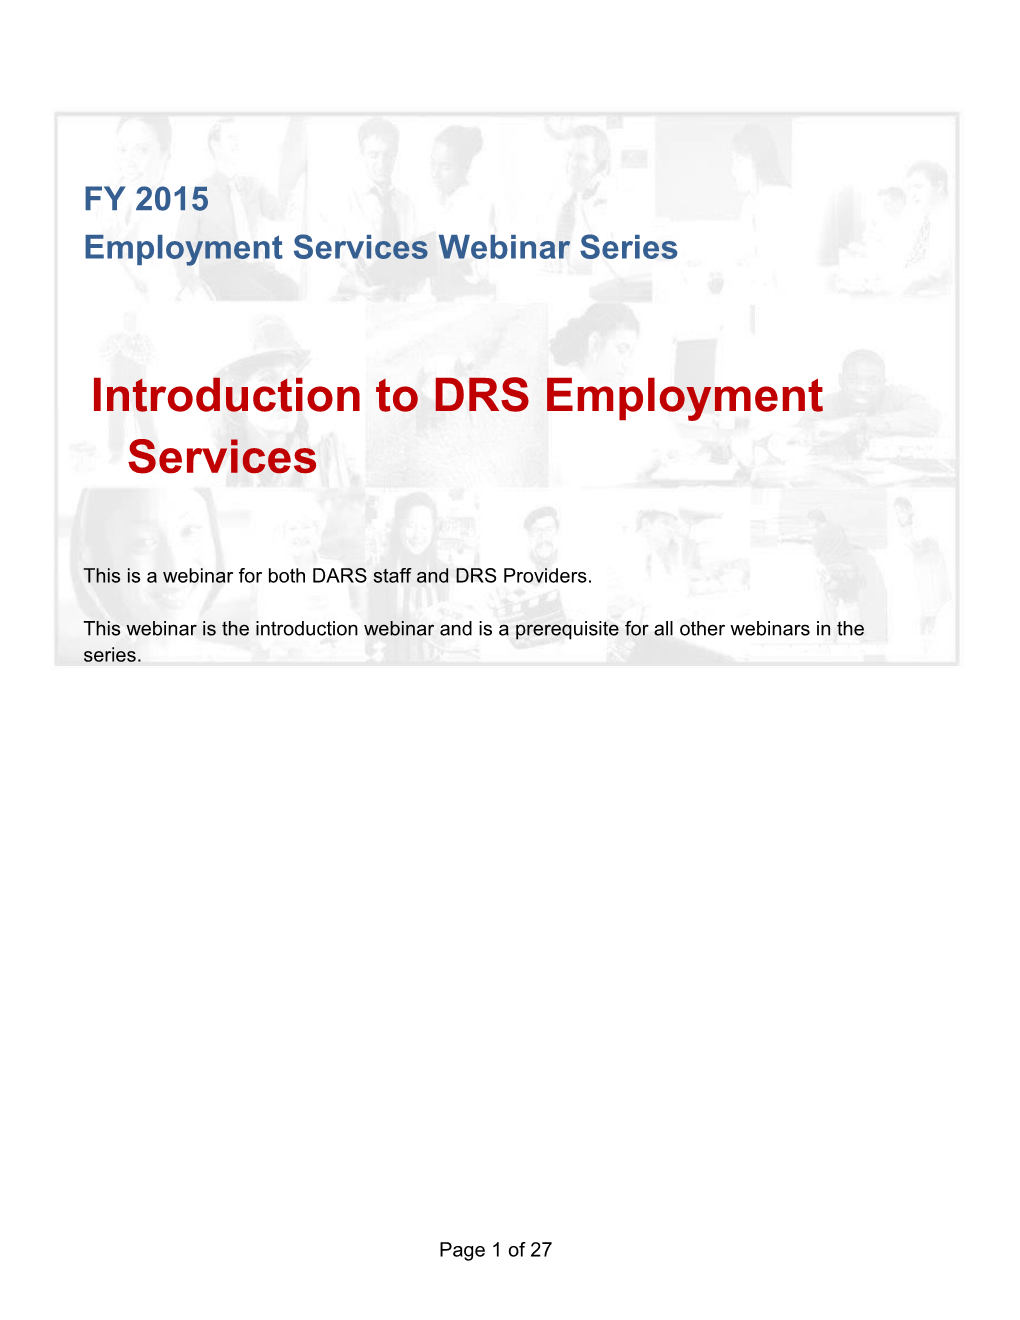 Introduction to DRS Employment Services